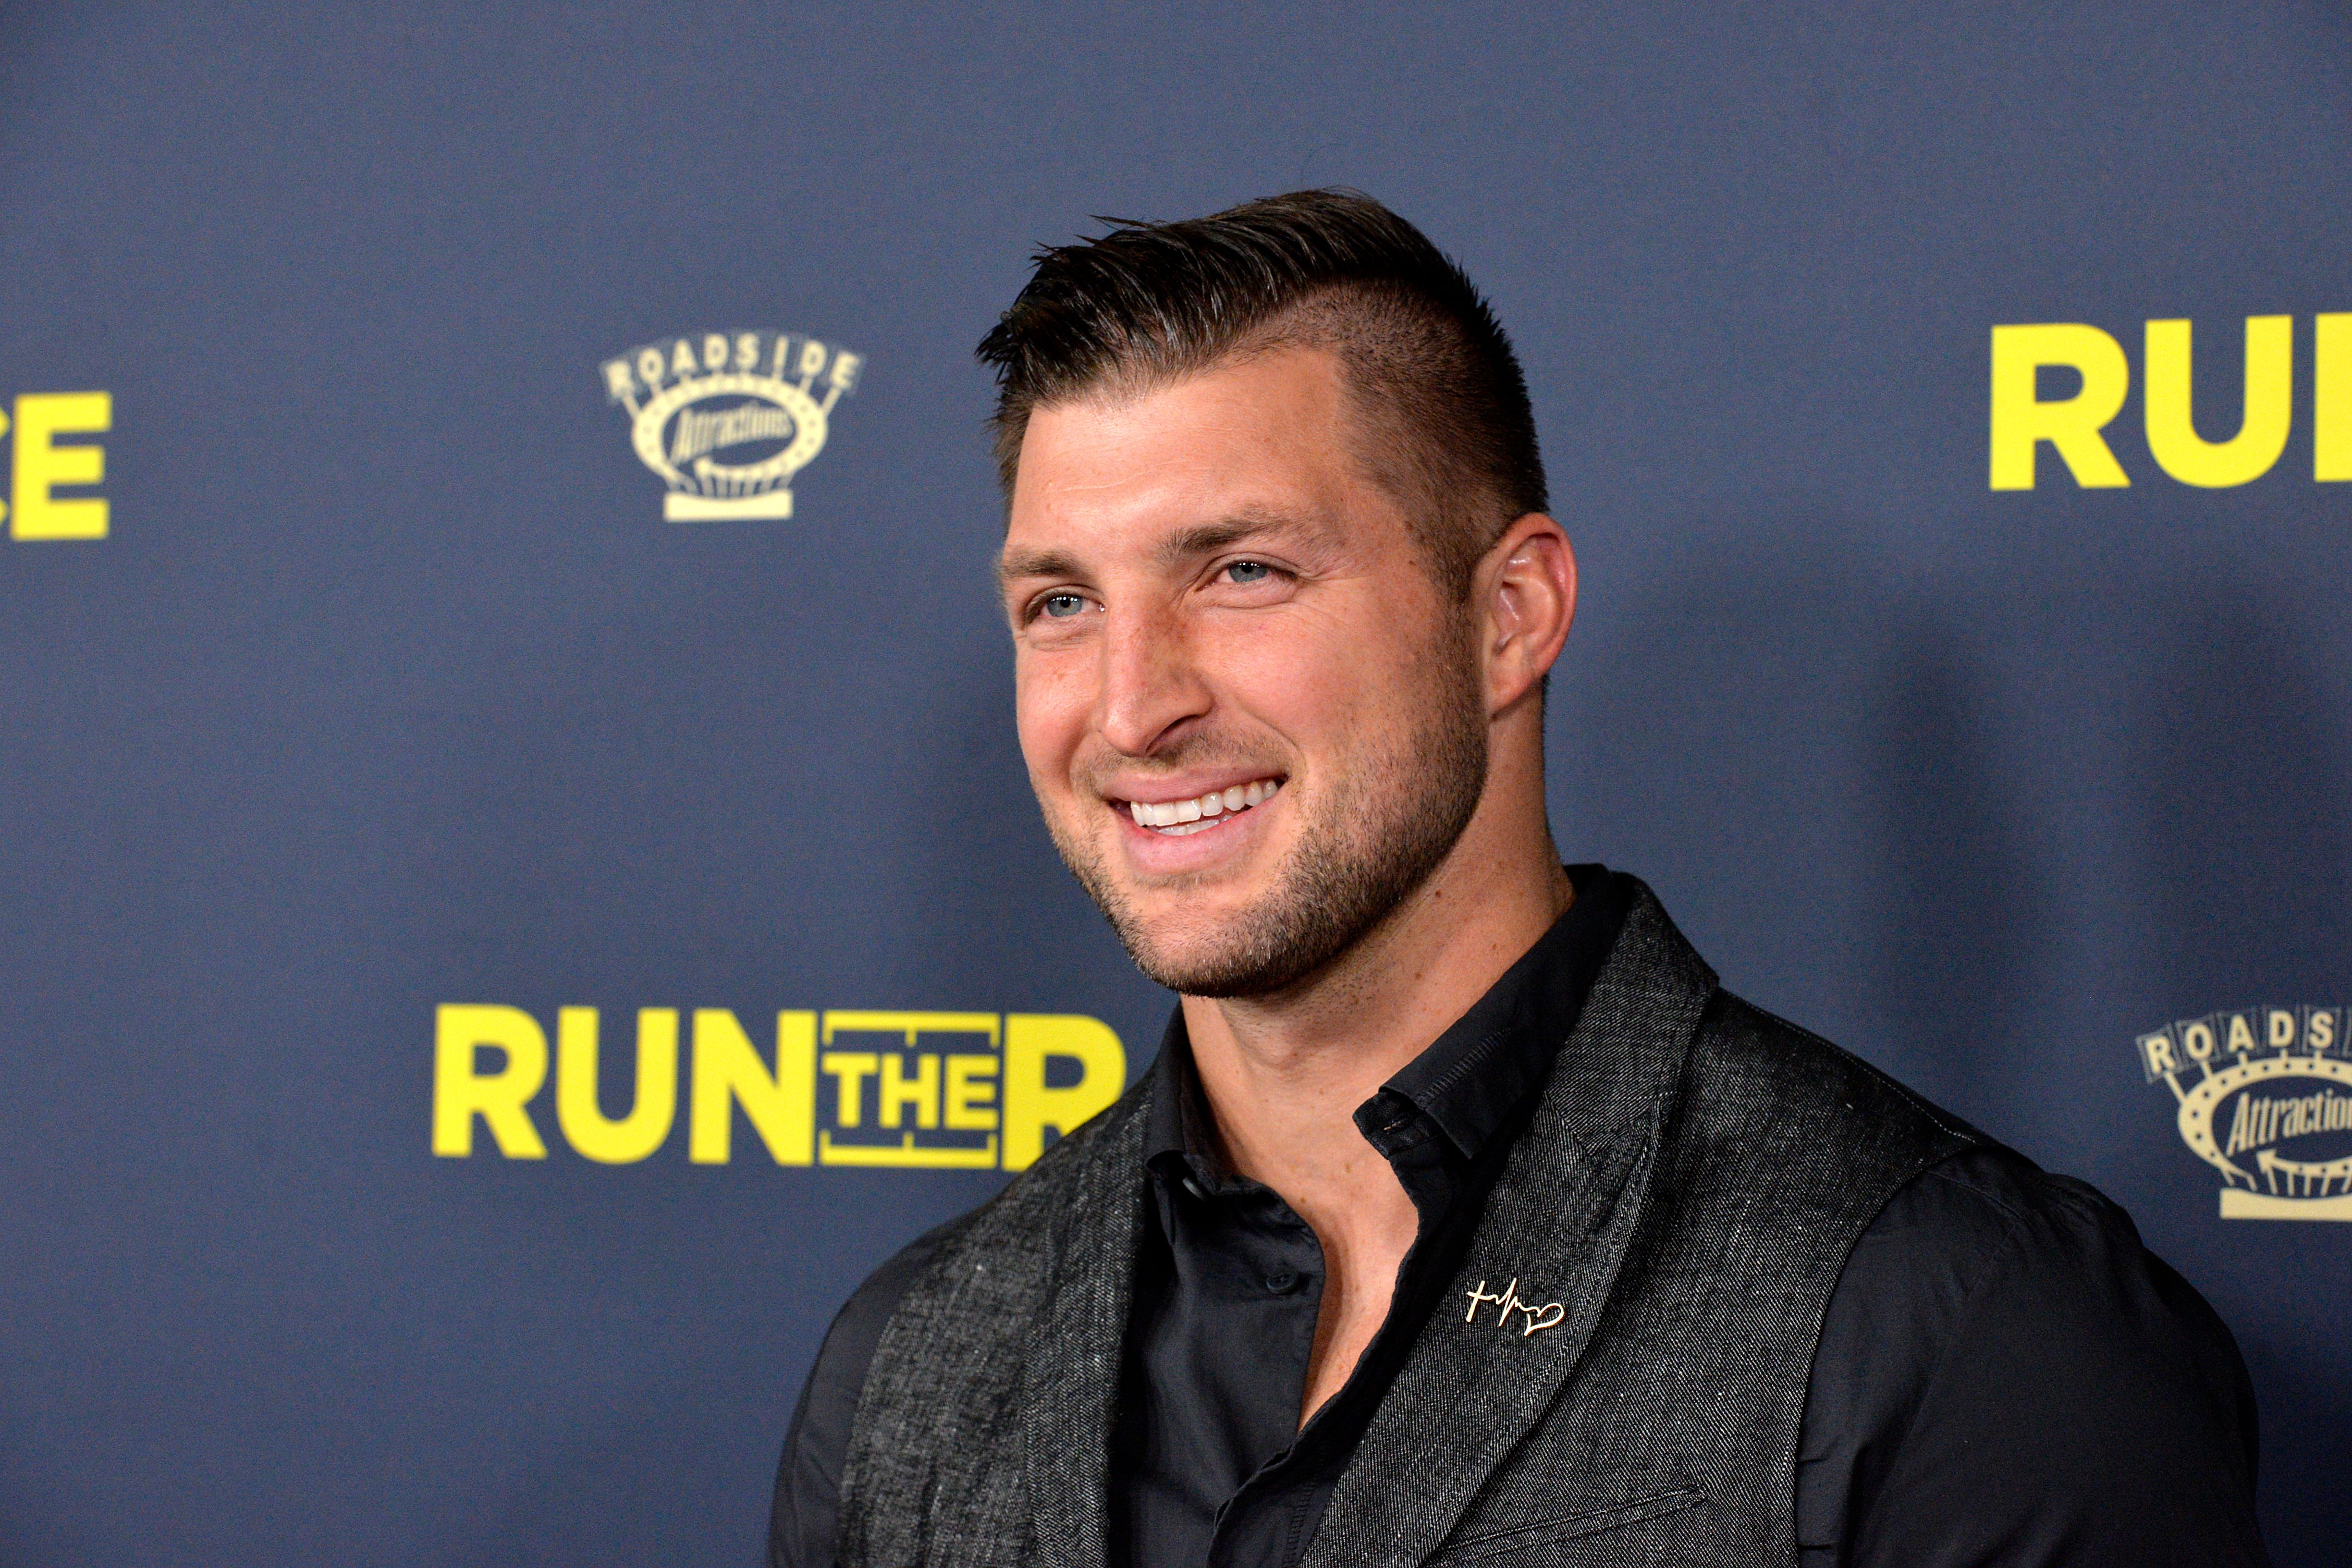 Tim Tebow at the premiere of Roadside Attractions' "Run The Race" in 2019 in Hollywood, California | Source: Getty Images